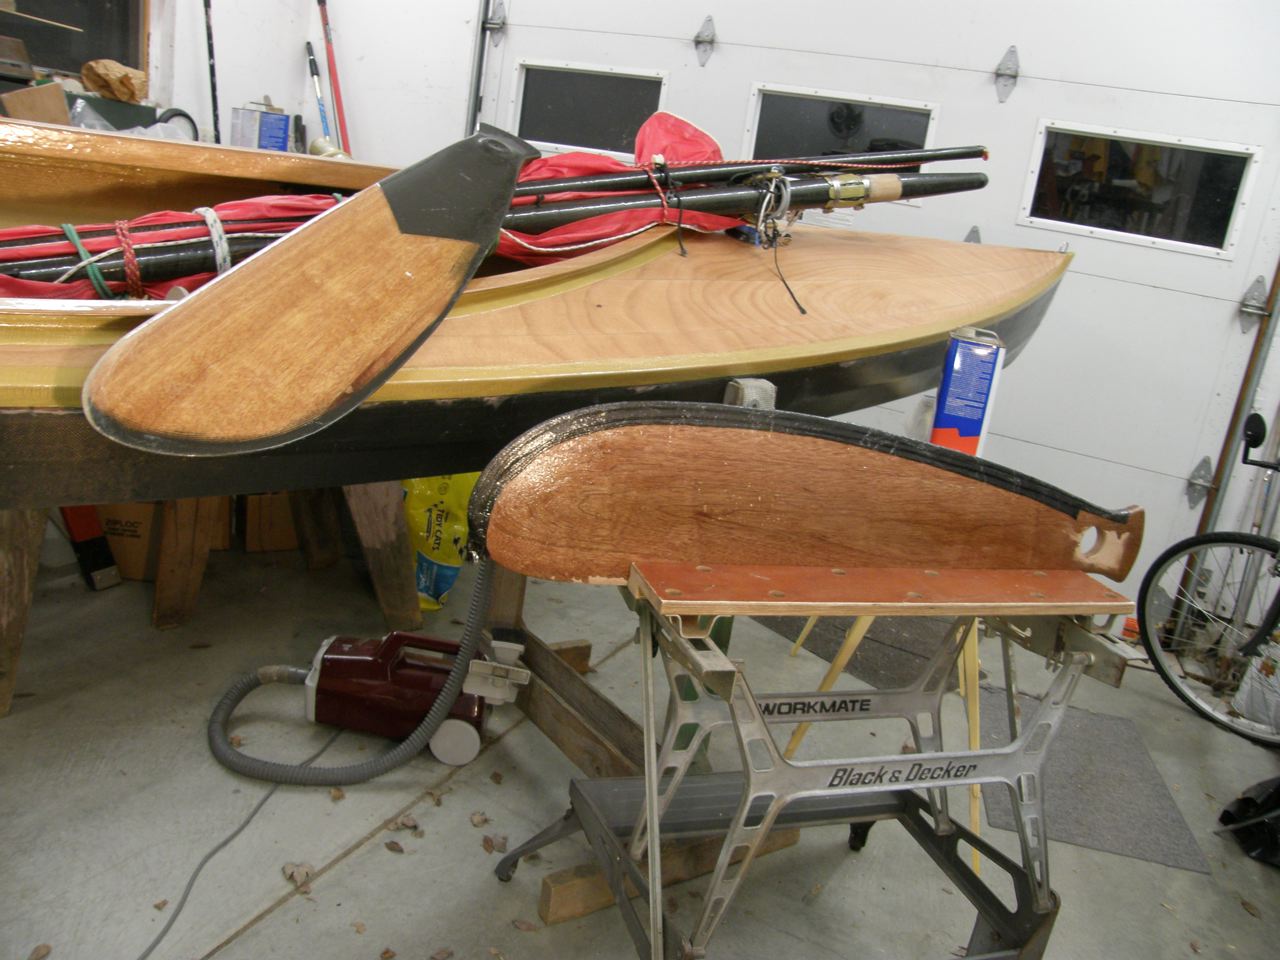 Sailing canoe leeboards under construction, showing NACA foil shapes 